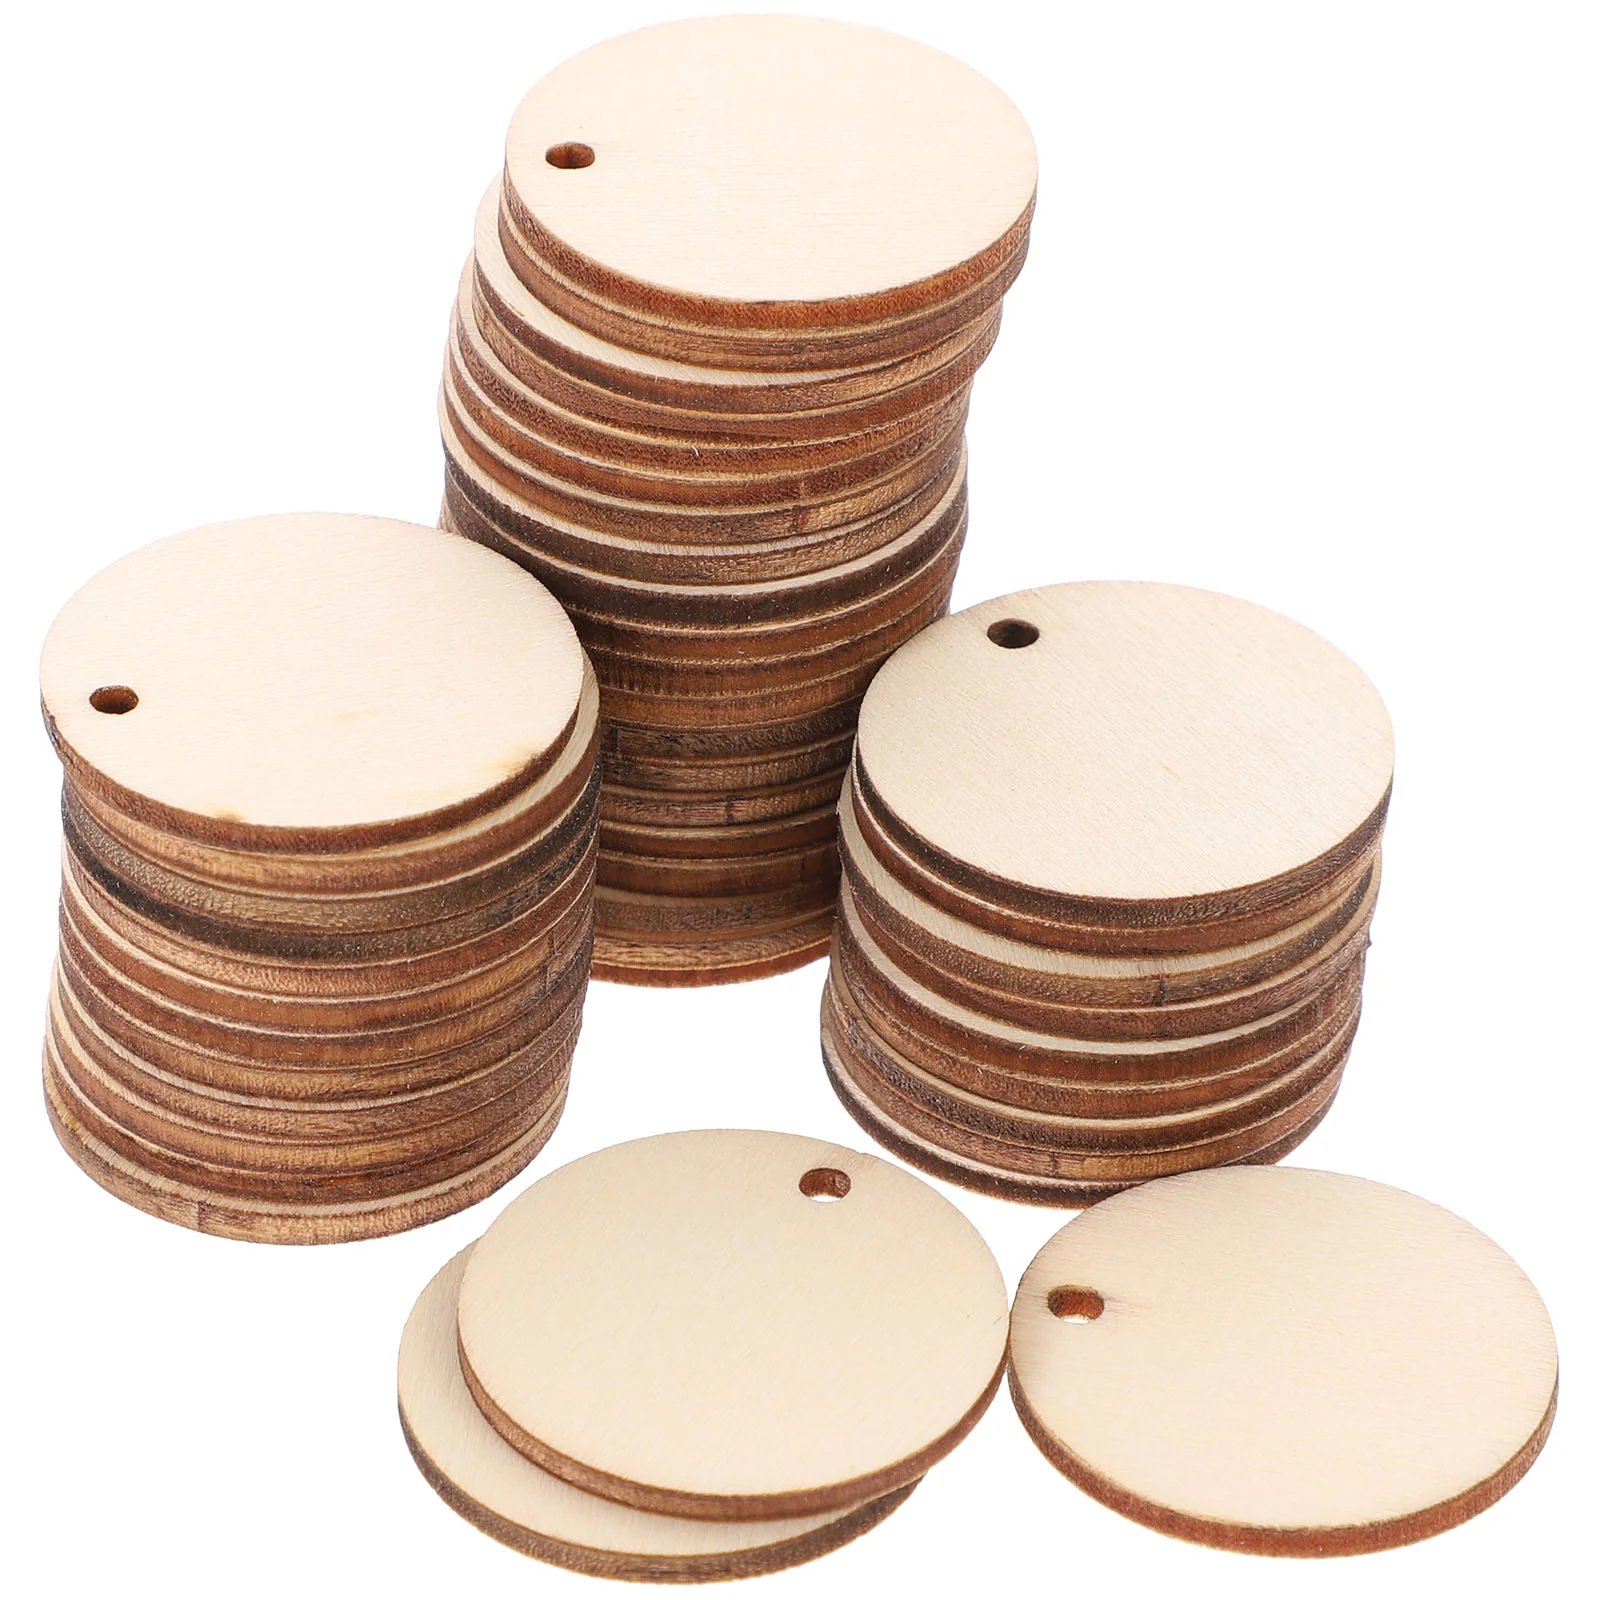 

Wood Wooden Slice Round Crafts Circles Diy Piece Ornaments Craft Unfinished Tags Discs Blank Hole Slices Birthday Log Holes